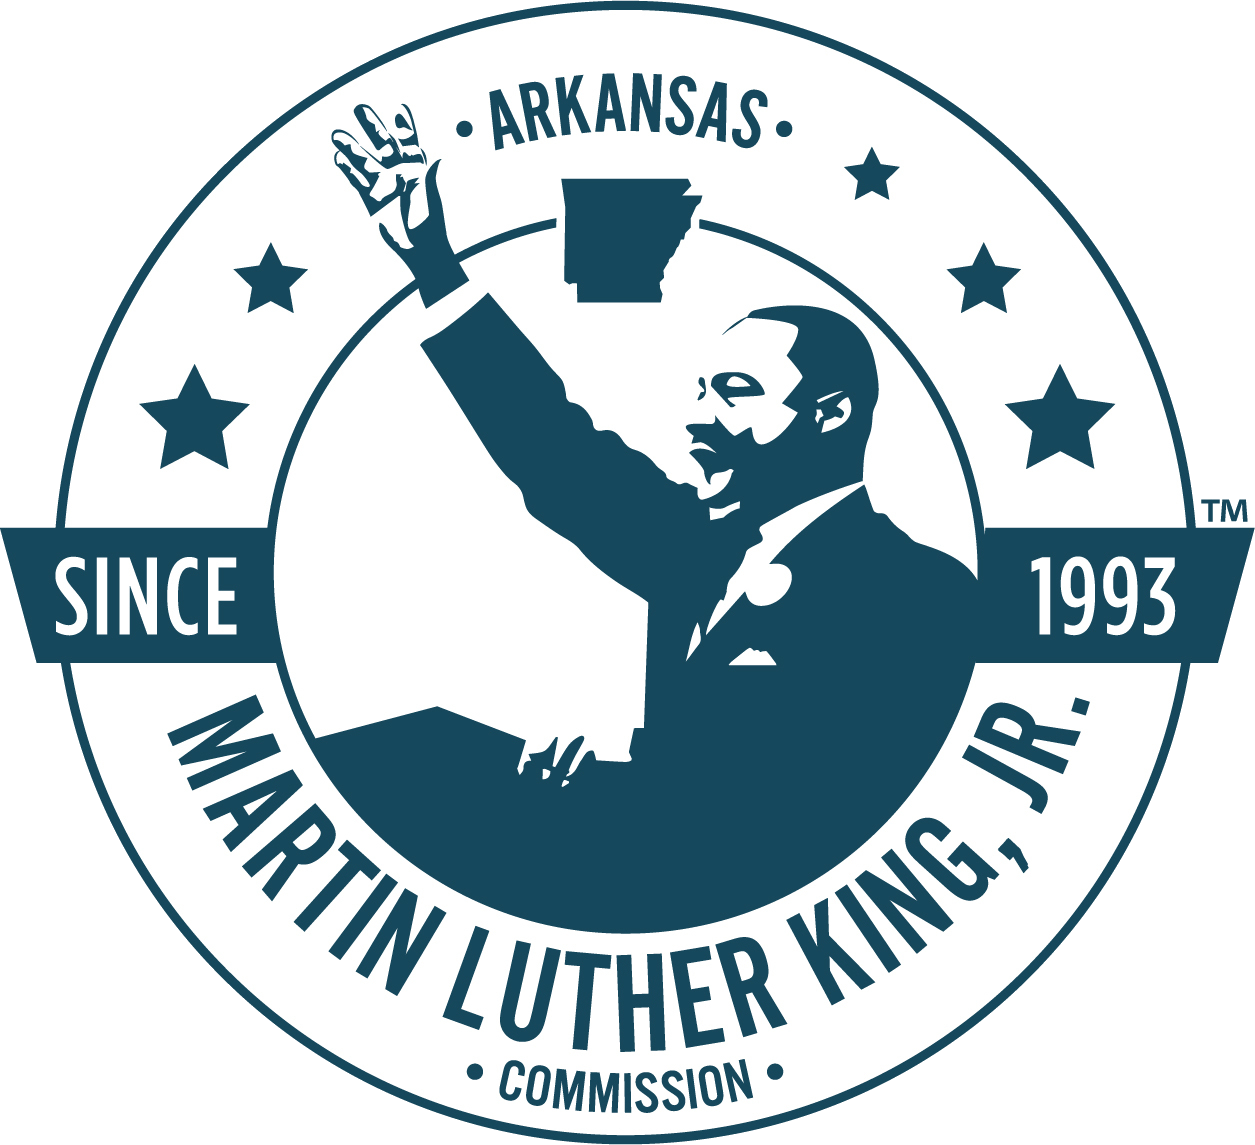 The Arkansas Martin Luther King, Jr. Commission